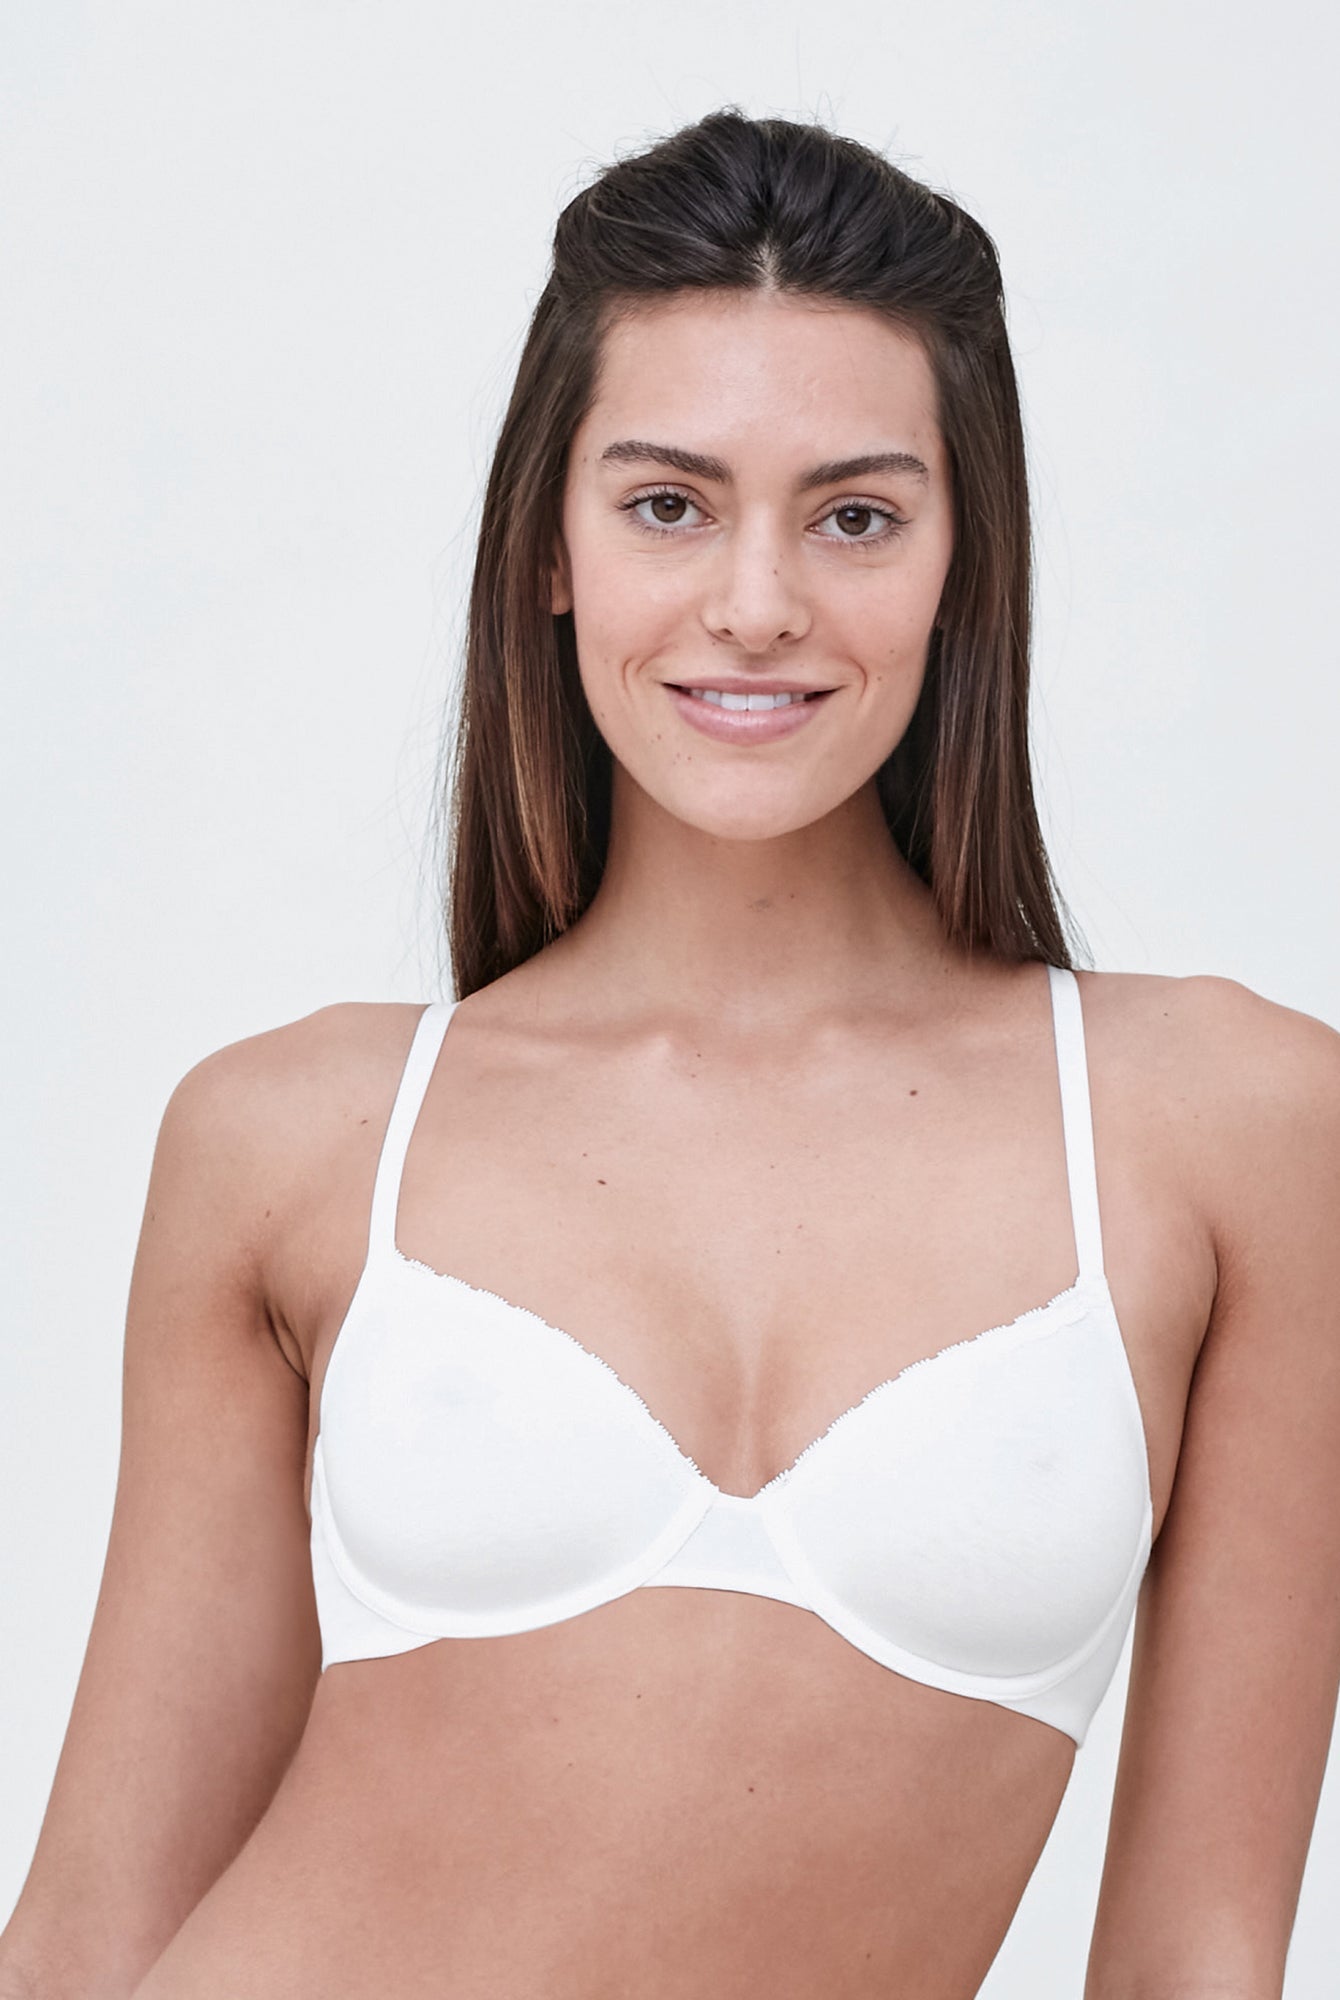 Skarlett Blue Dnu Women's Dare Fully Adjustable Comfortable Everyday Demi T  Shirt Bra With Dotted Stretch Lace And In White,nylon